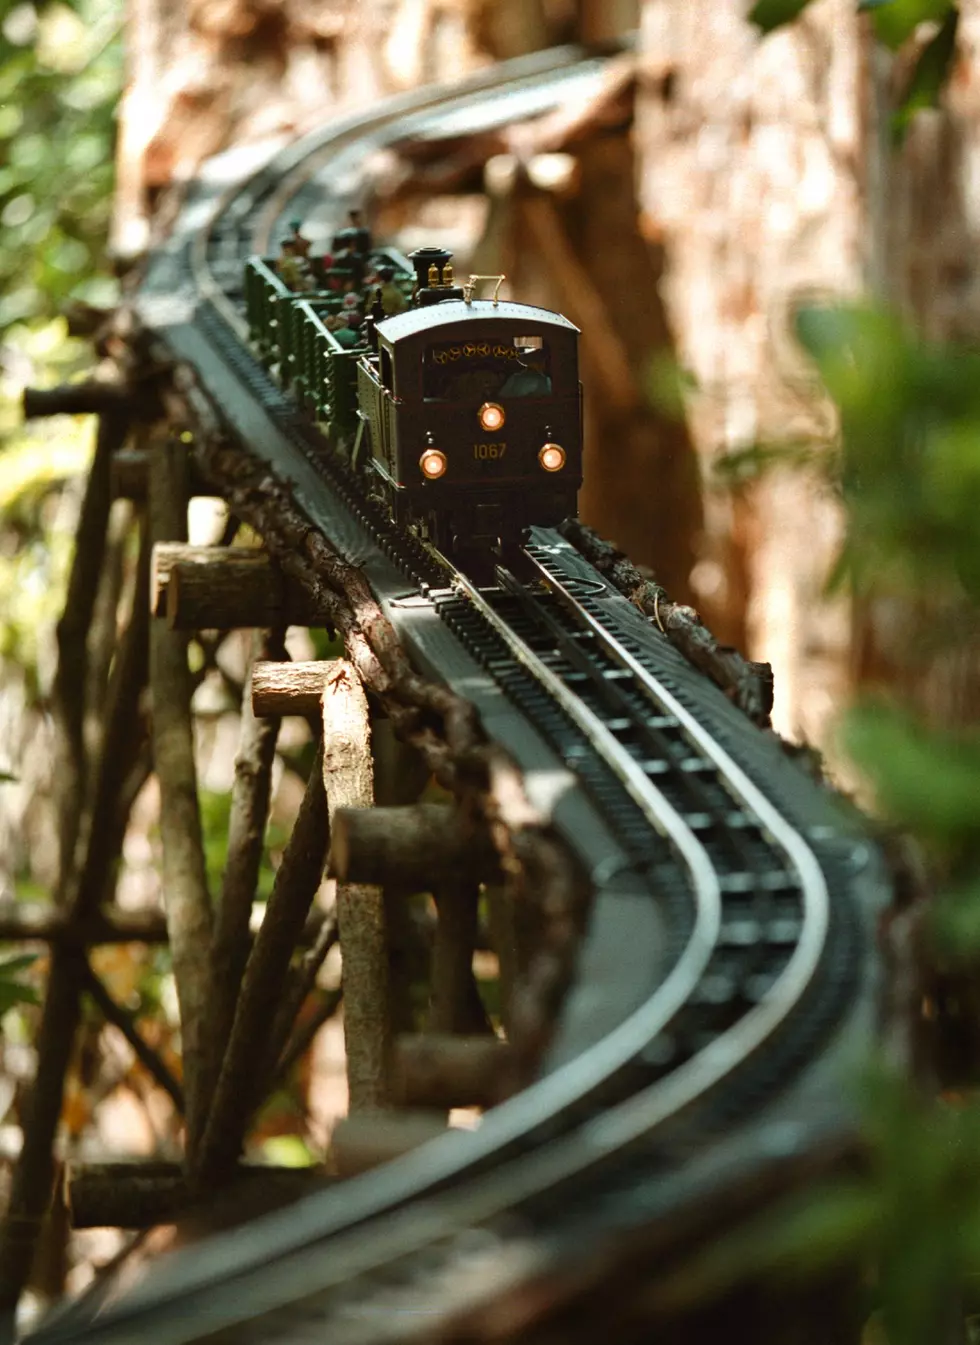 Free Beer & Hot Wings: Man Builds 16-Acre Model Railroad with 50,000 Feet of Track [Video]